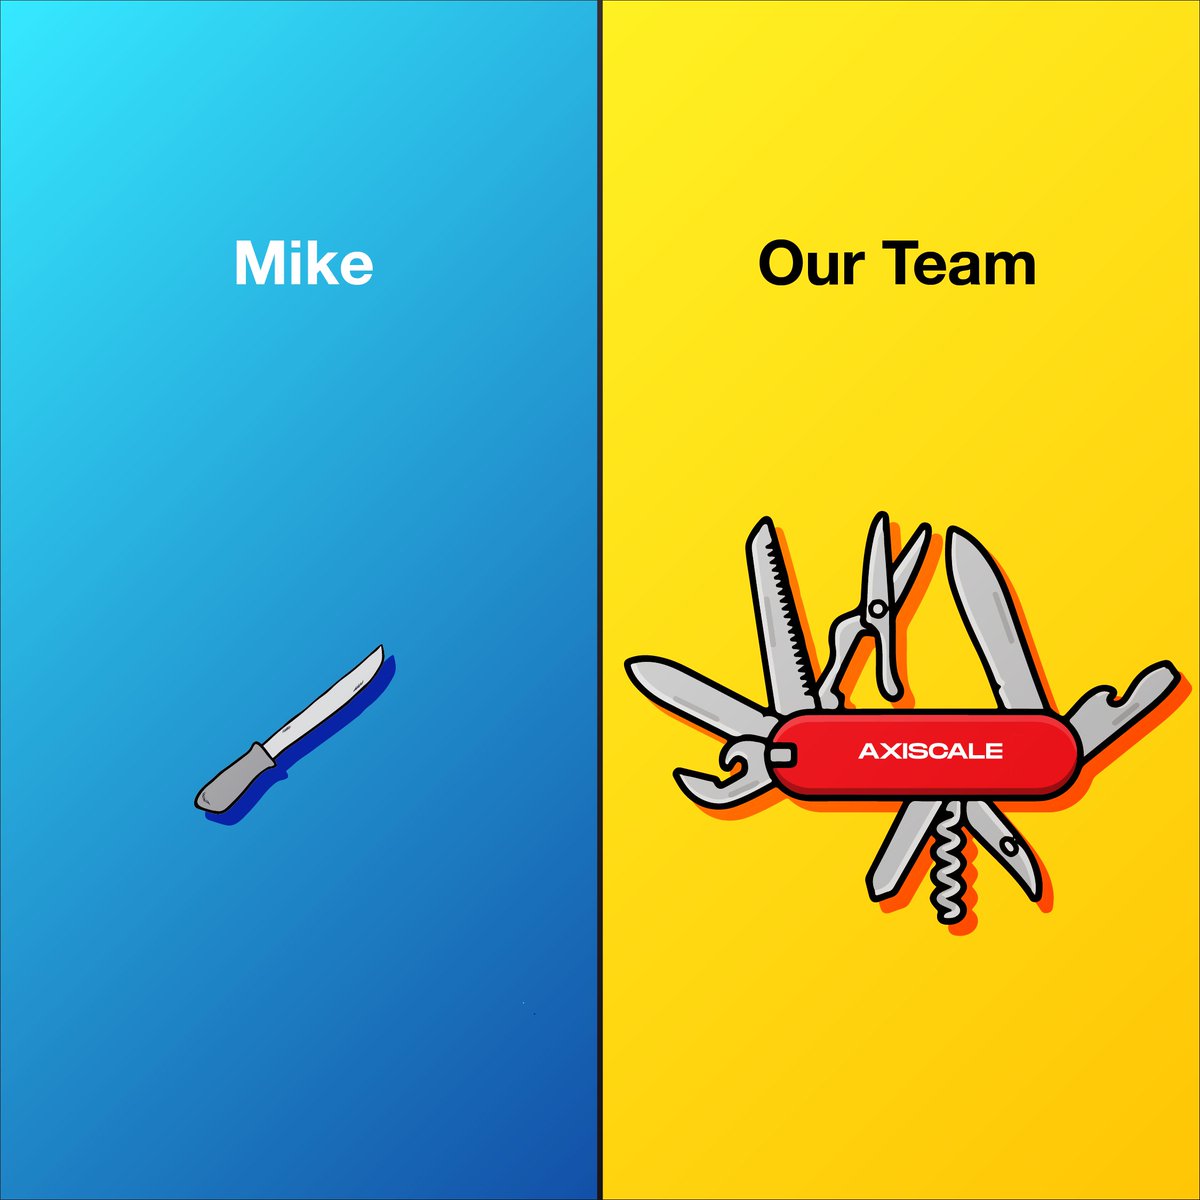 For Mike, that’s having a team to come up with creatives for his campaignsDo you now see the difference of having a creatives team? Let me know!- Mark